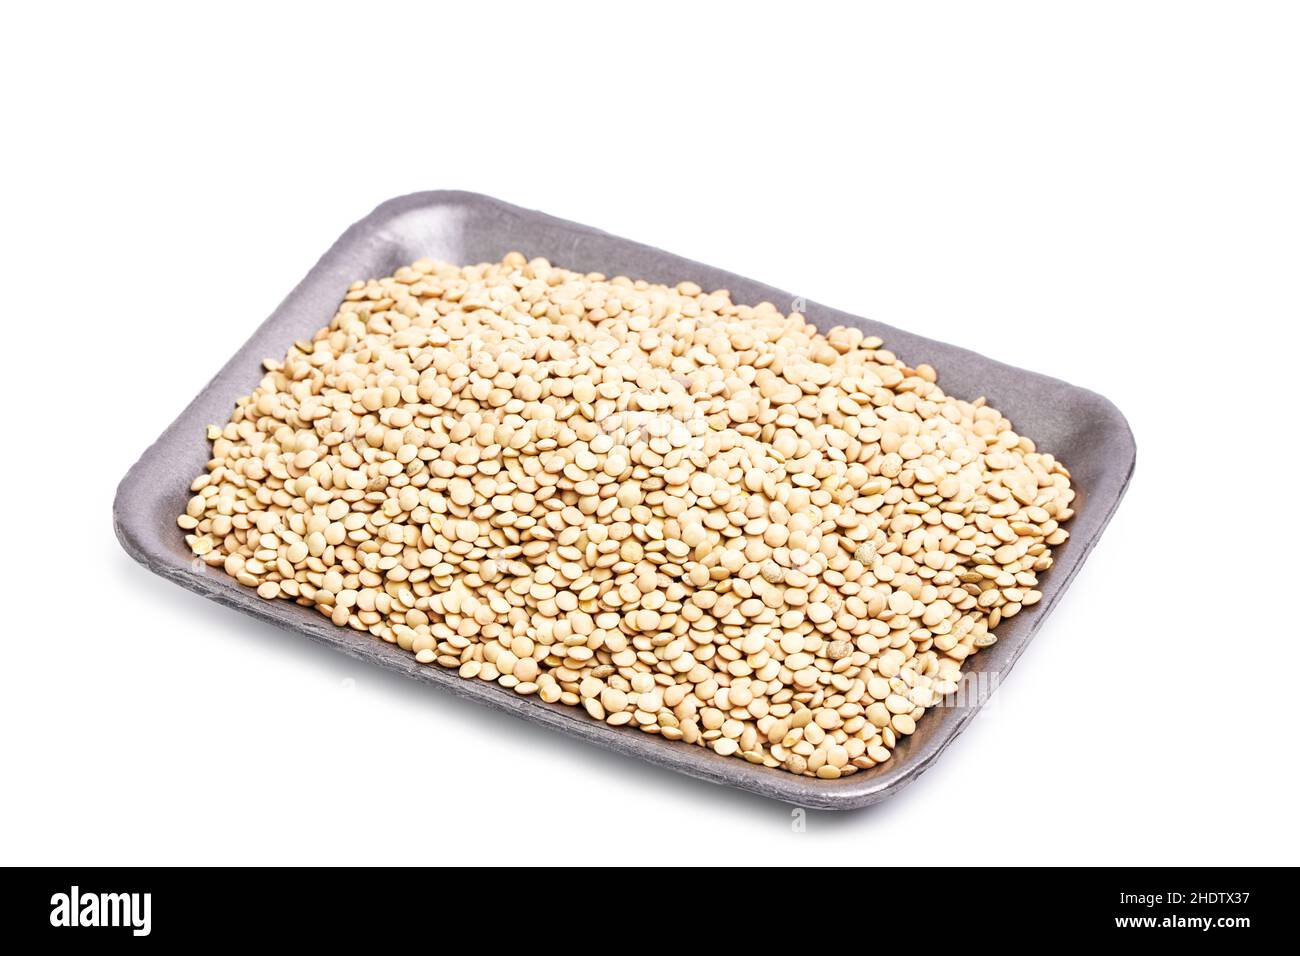 Raw green lentils on a tray on a white background. Healthy and vegan food concept Stock Photo